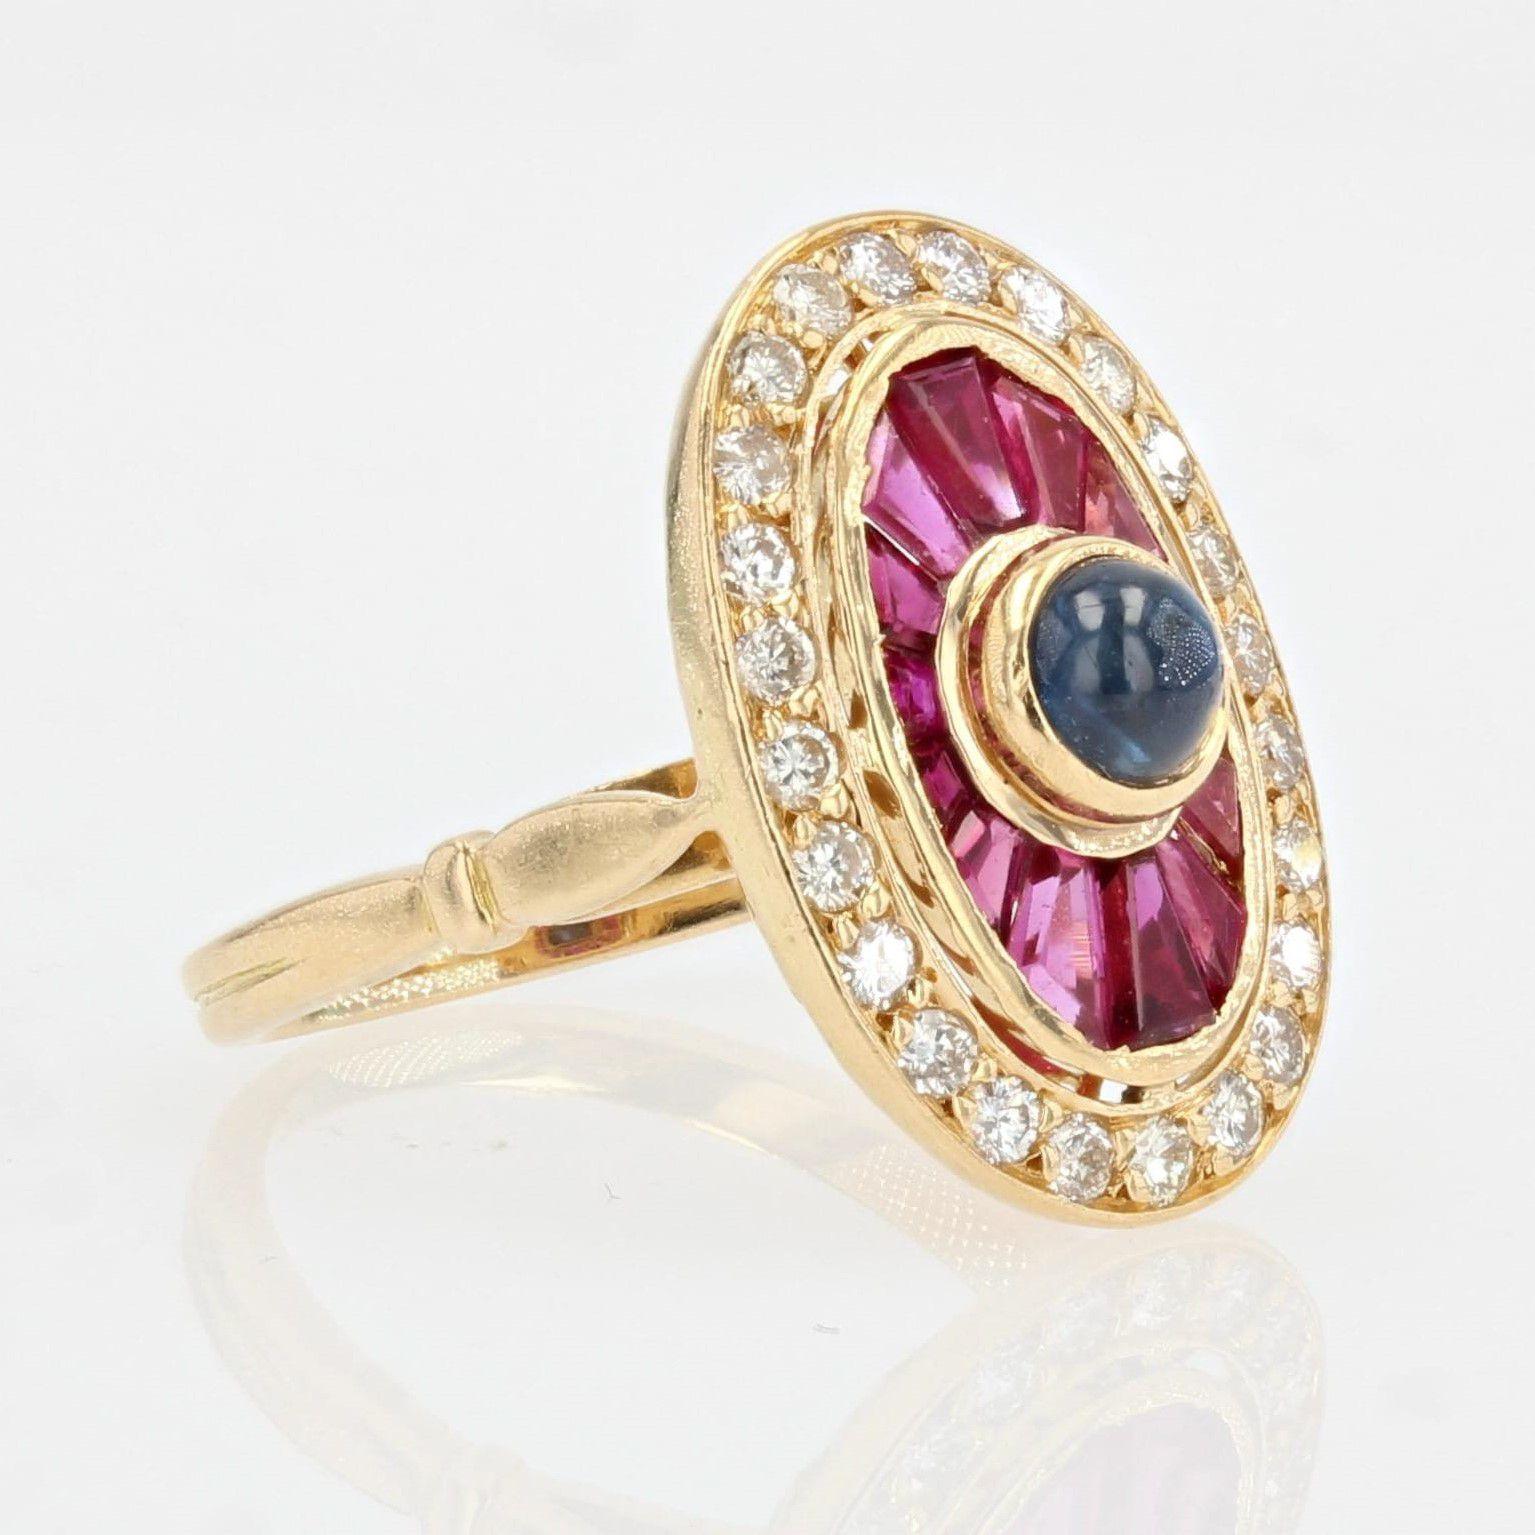 French Art Deco Style Ruby Sapphire Diamonds 18 Karat Yellow Gold Ring For Sale 6